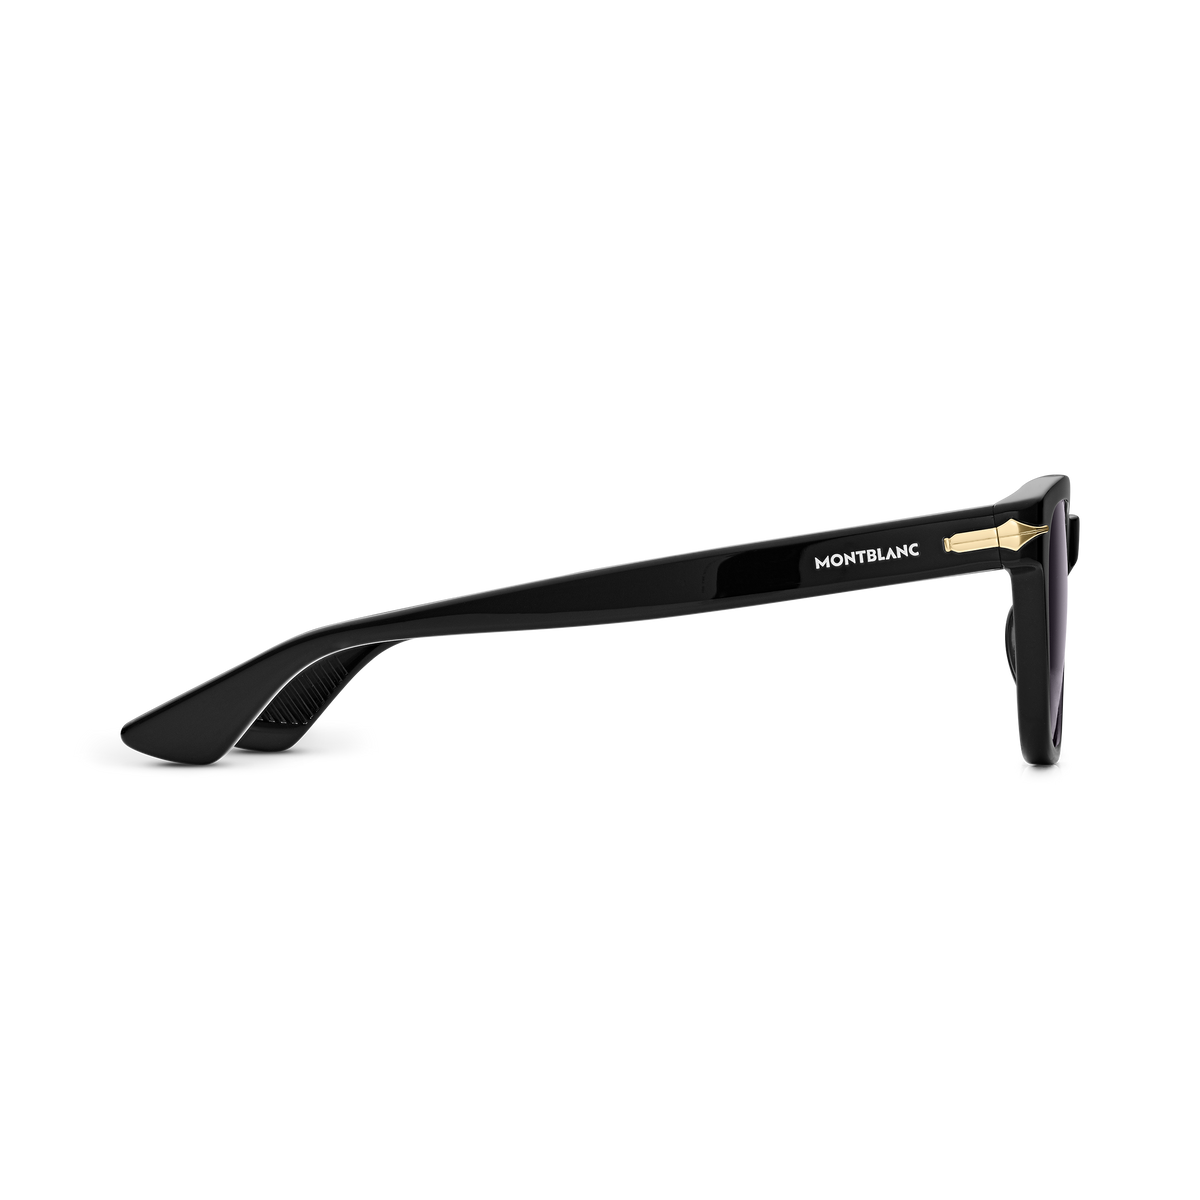 Squared Sunglasses with Black Acetate Frame